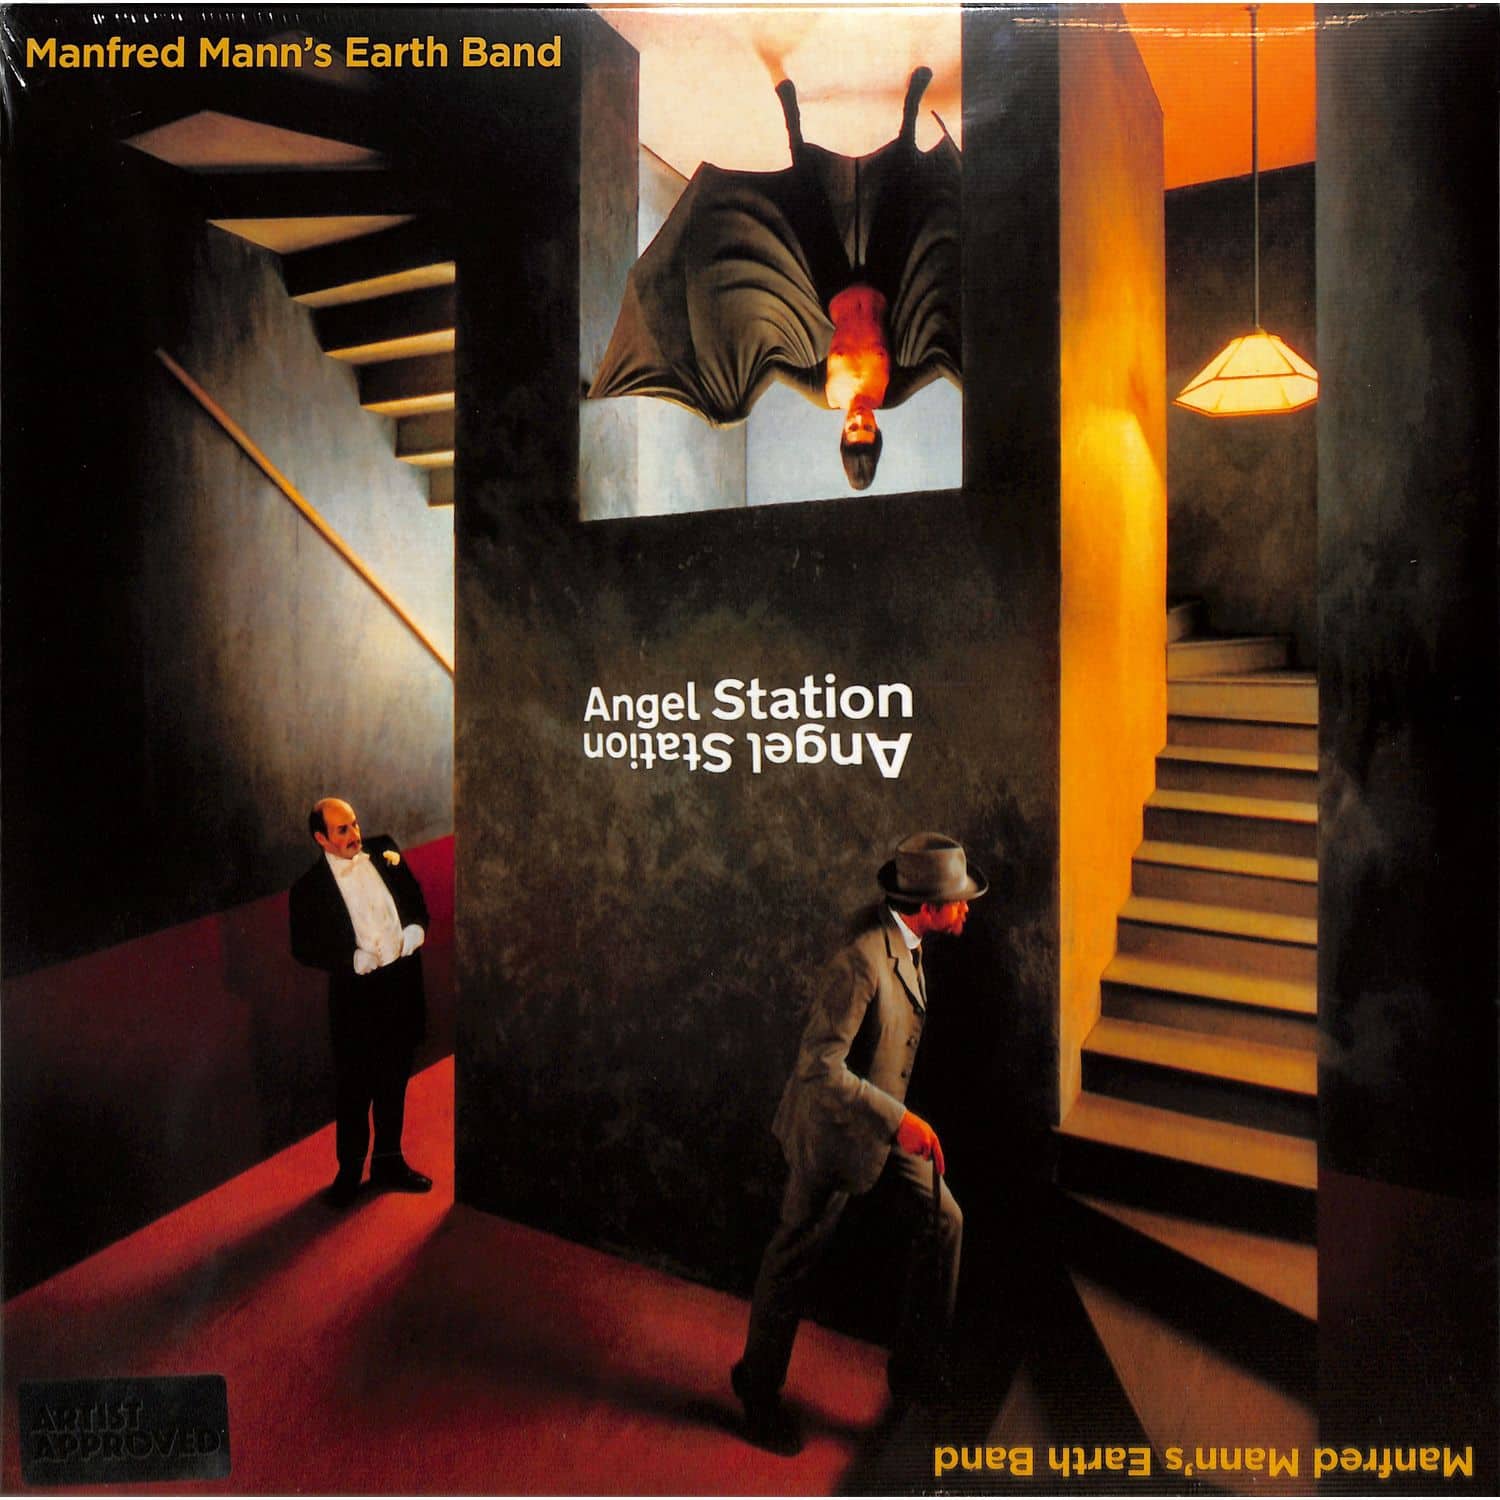 Manfred Mann s Earth Band - ANGEL STATION 